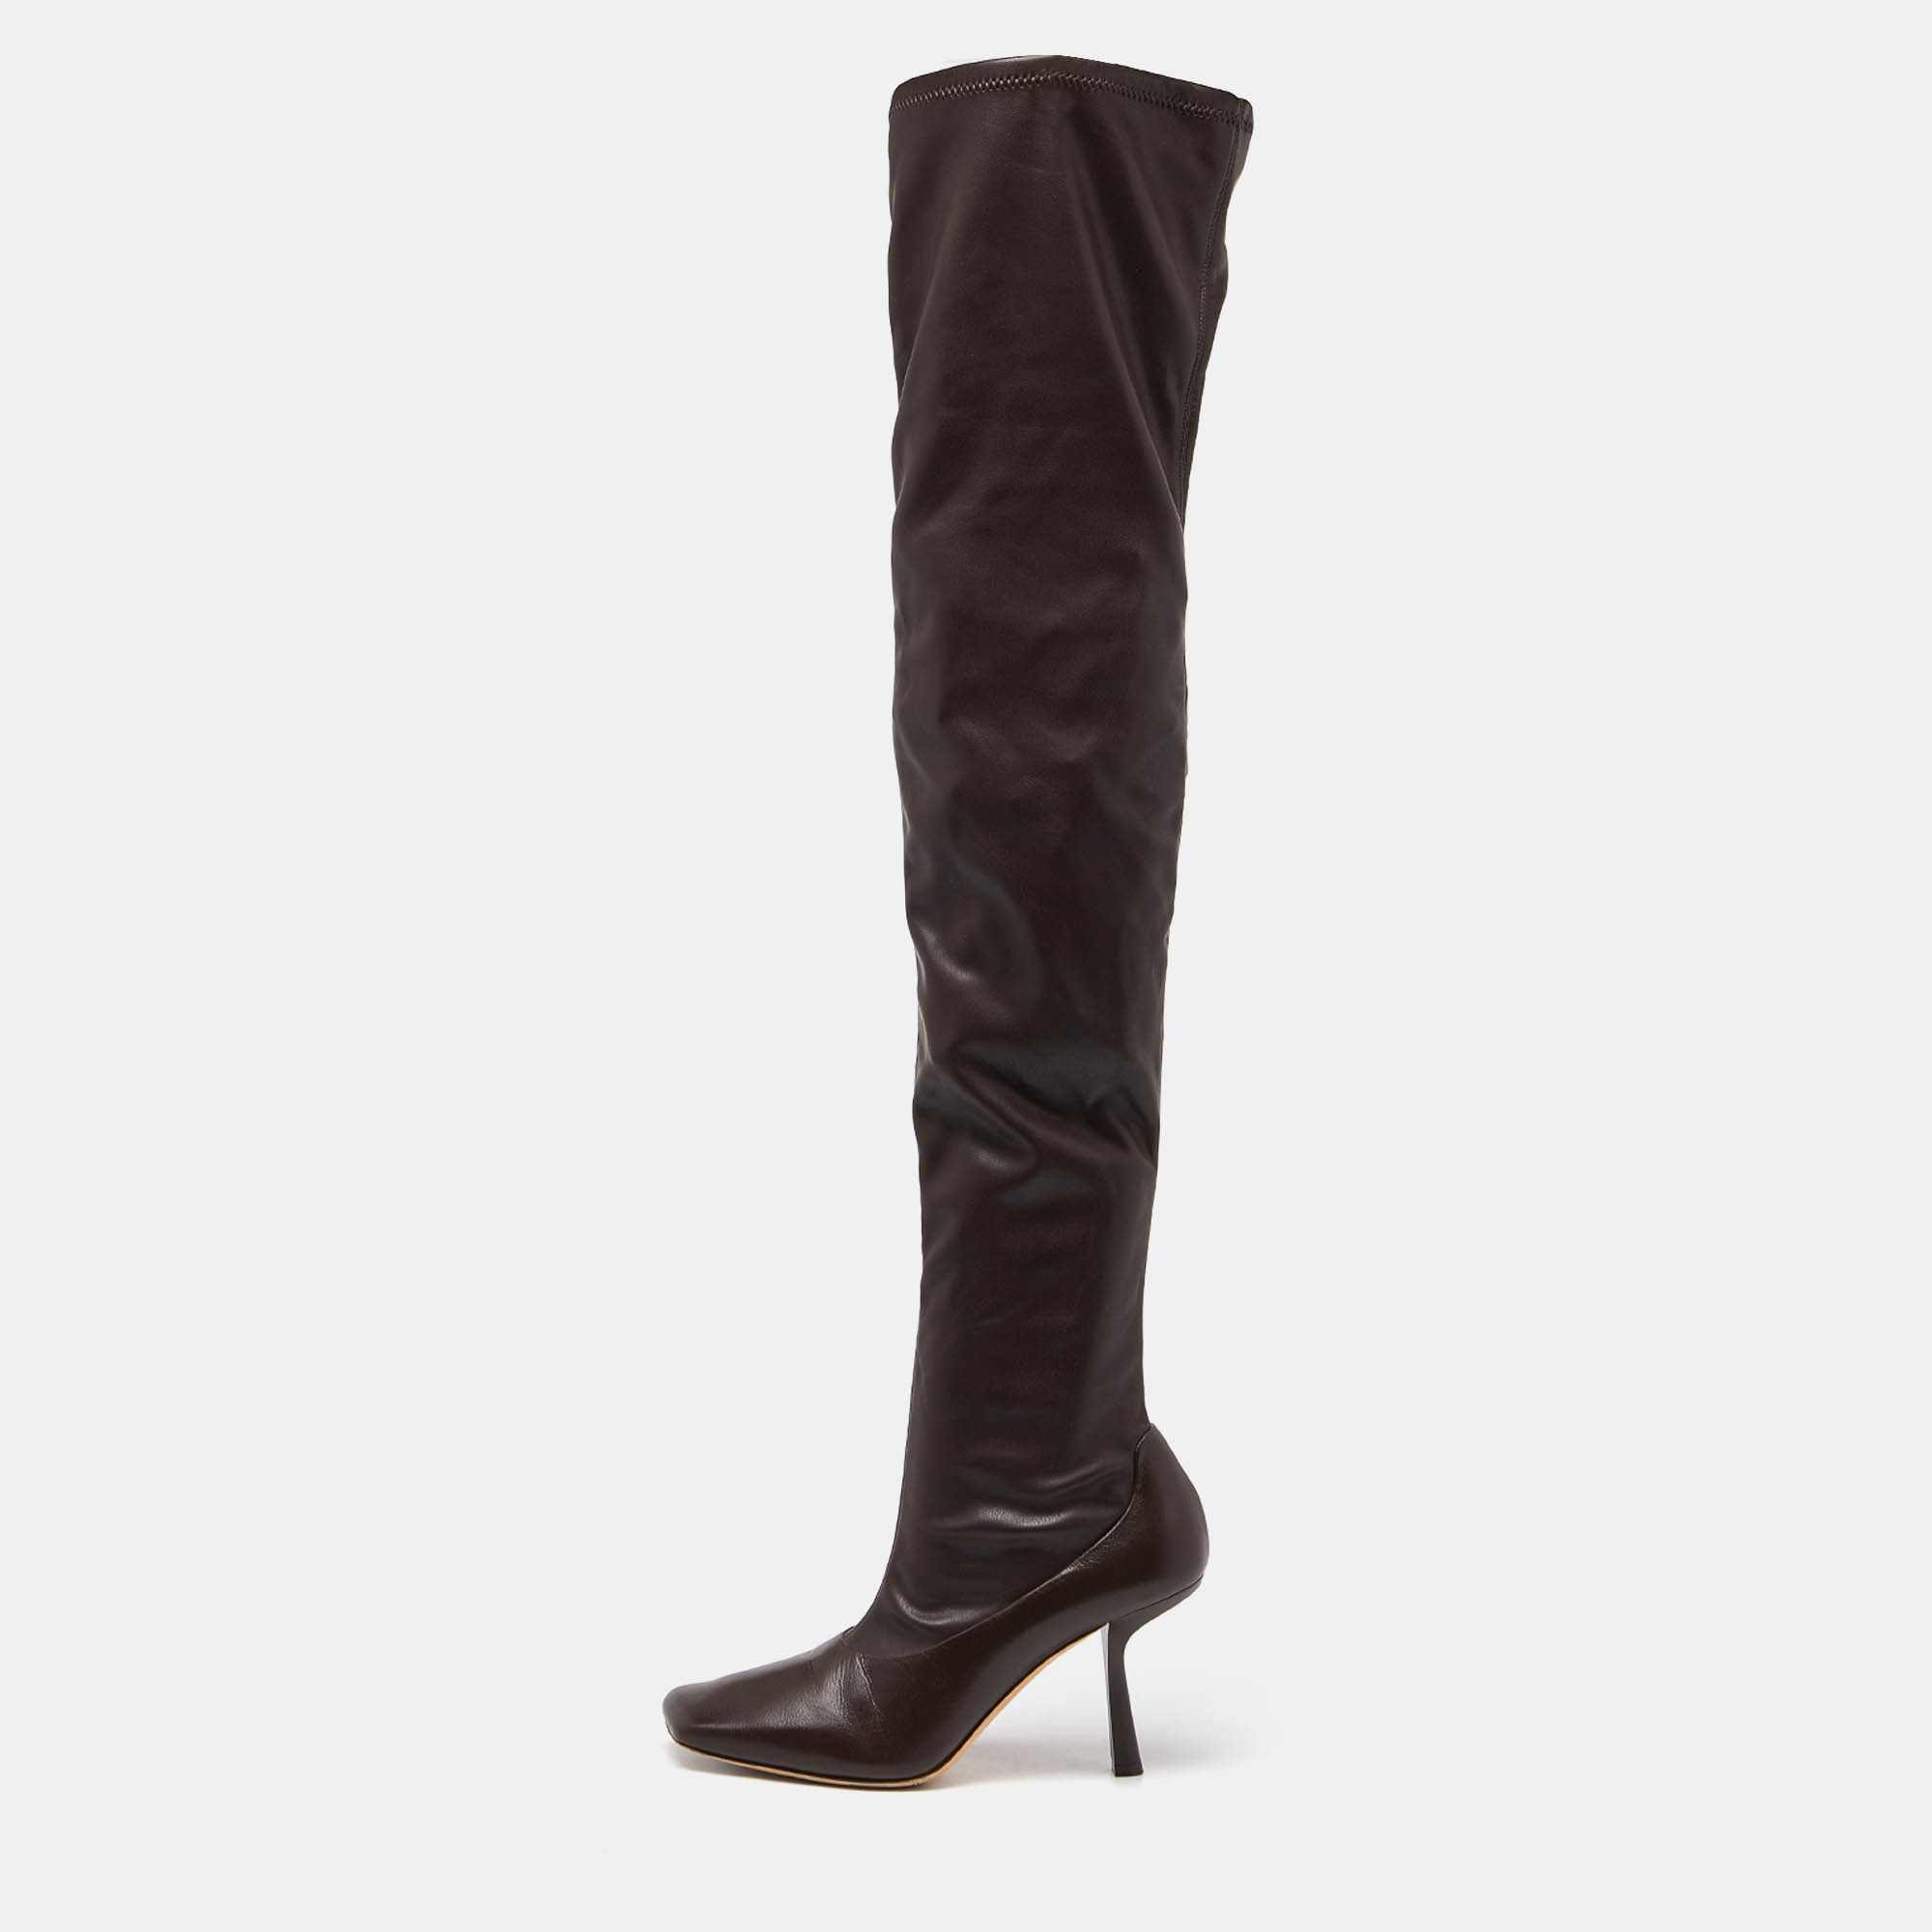 Pre-owned Jimmy Choo Brown Leather Over The Knee Length Boots Size 40